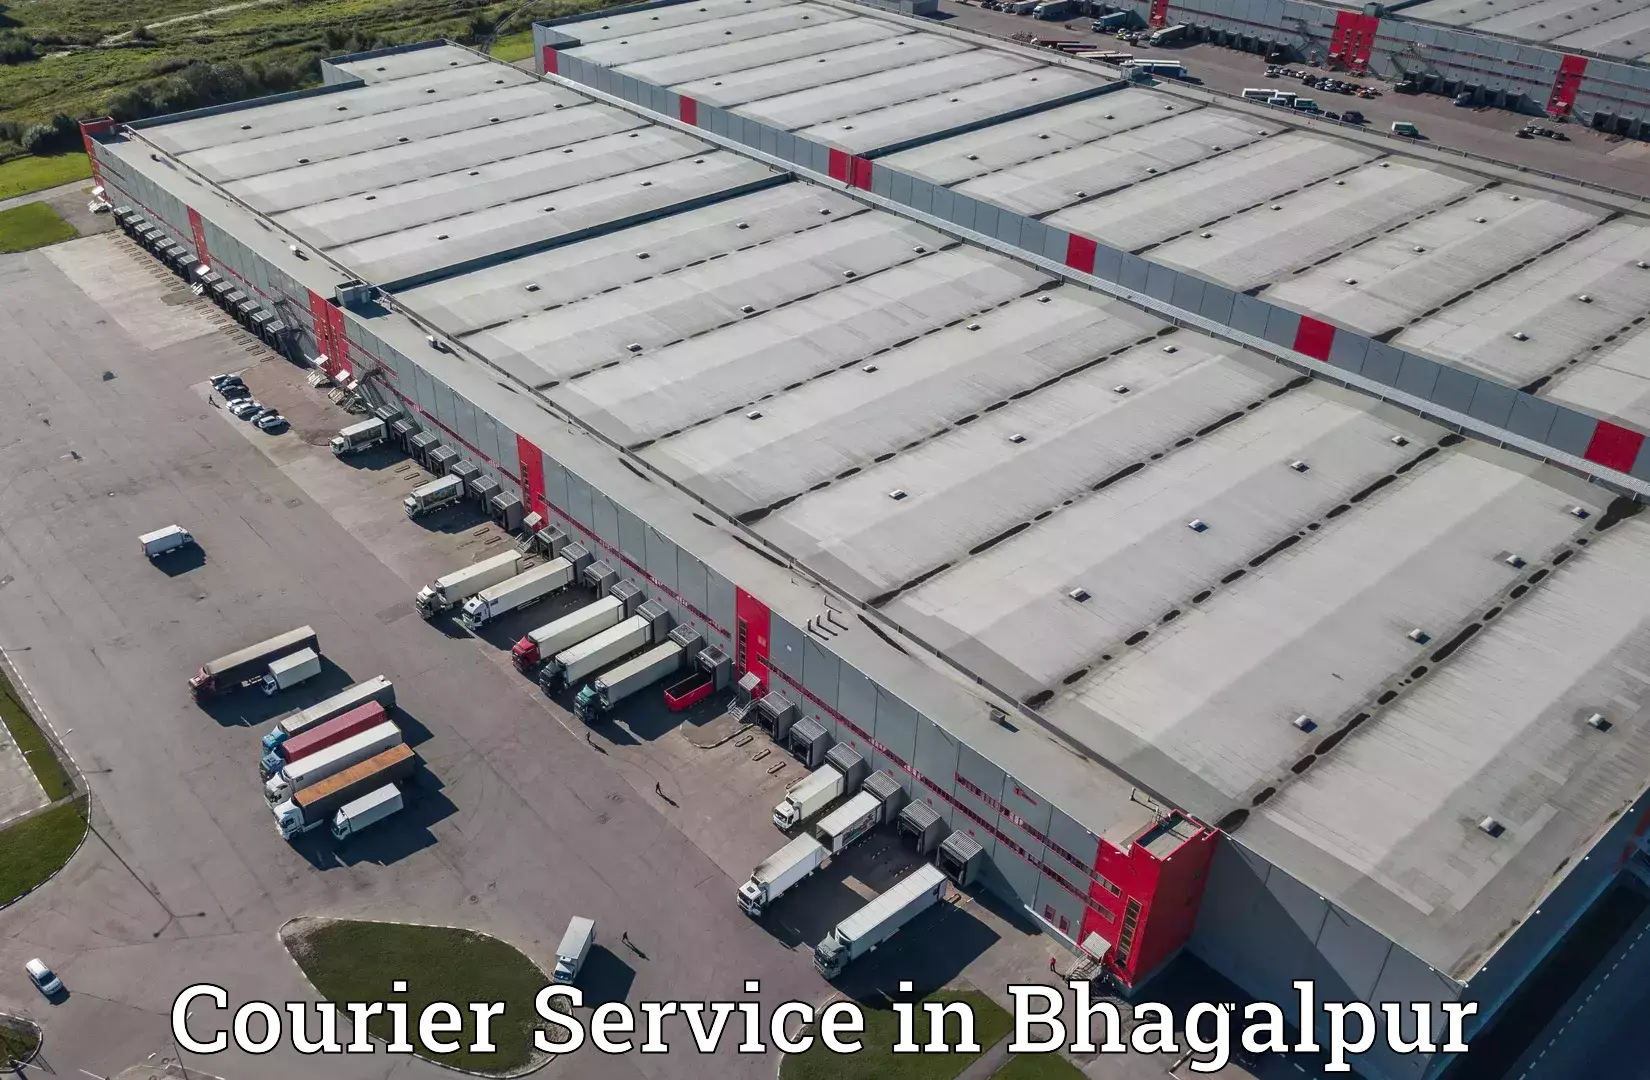 Efficient shipping operations in Bhagalpur